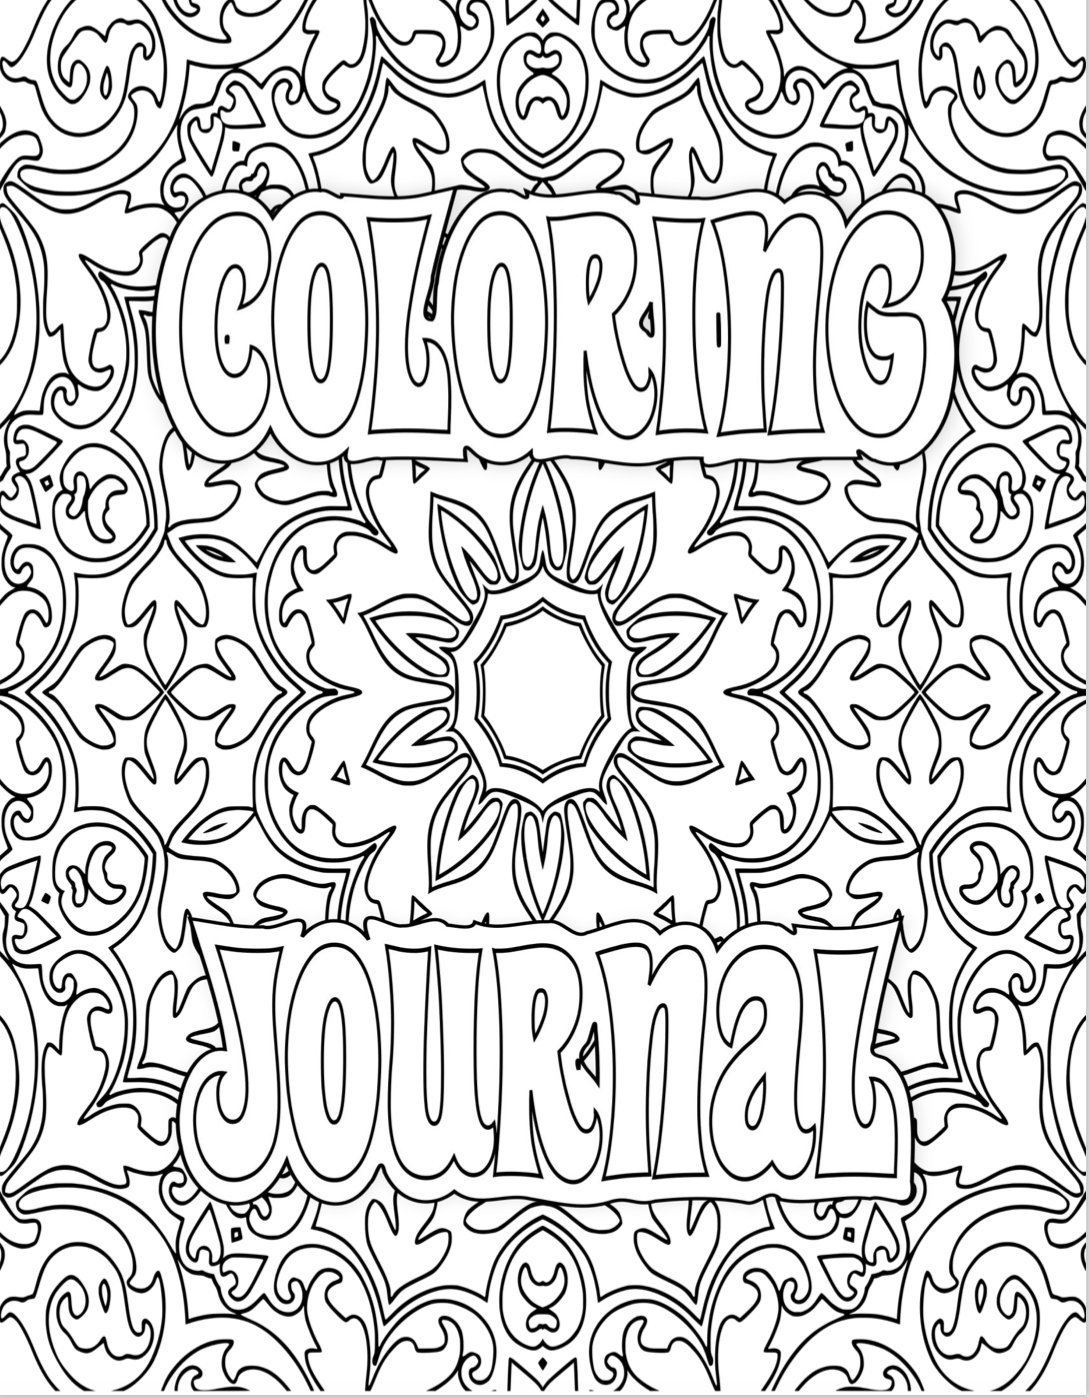 Coloring pages adult coloring book and journal meditation mandala heart pattern to print color printable pdf instant download